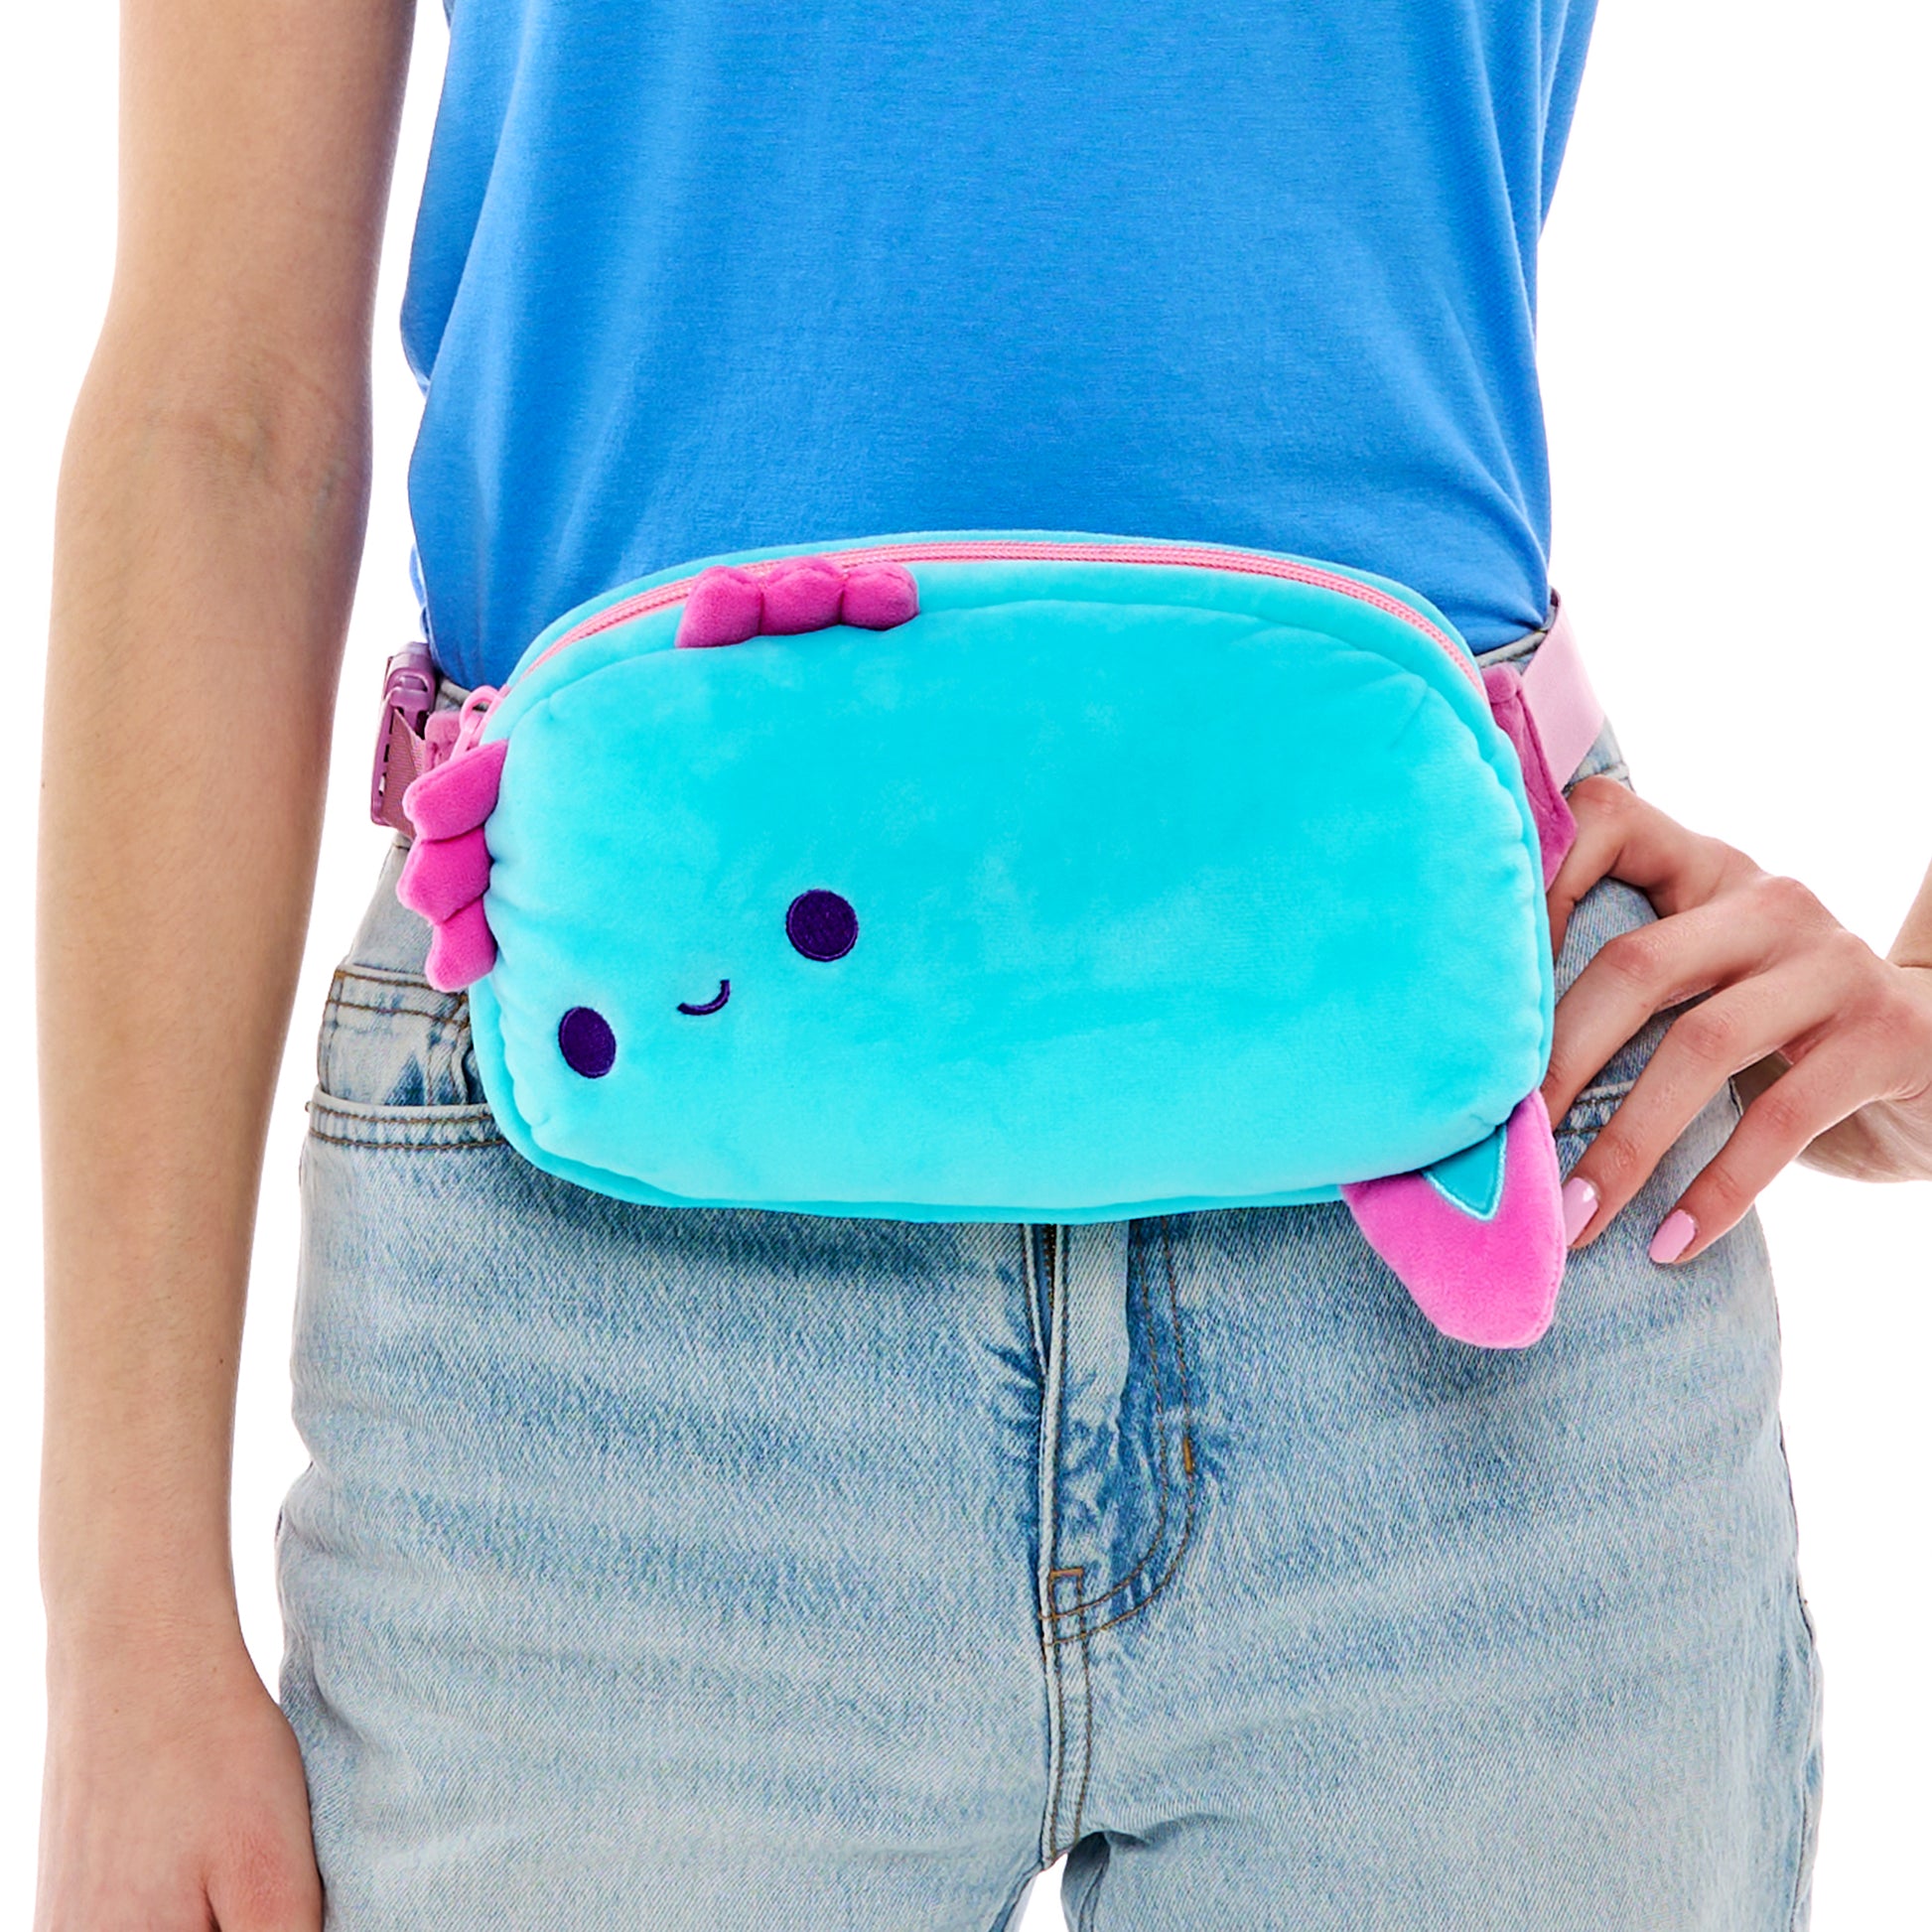 A person wearing jeans and a blue t-shirt is holding a cute, turquoise Plushiverse Alotl Fun Plushie Fanny Pack by TeeTurtle with a smiling face, pink accents, and an adjustable belt.